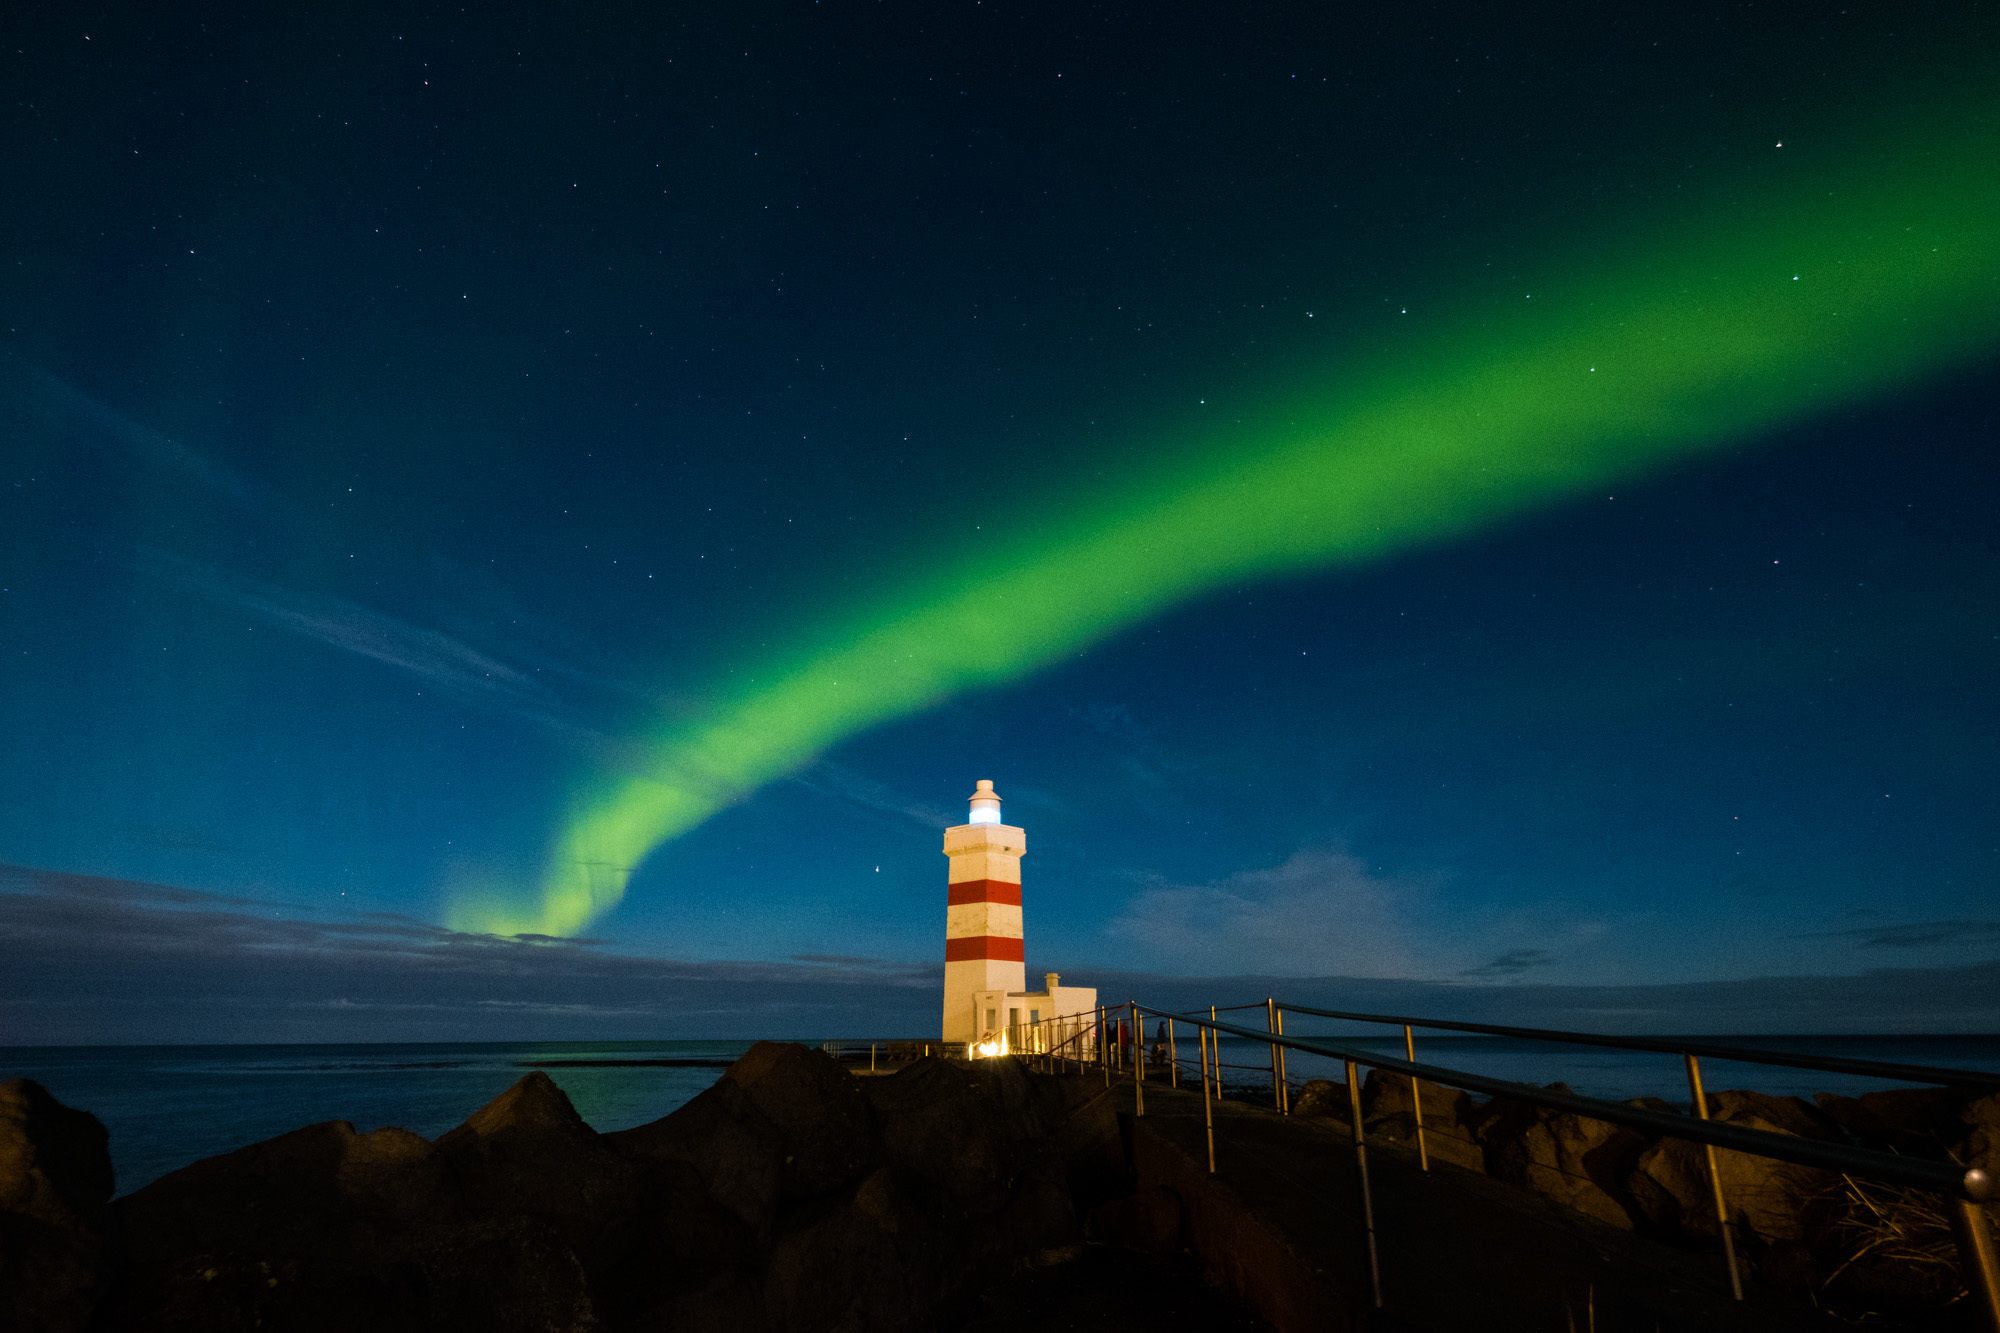 Guide to Photographing the Northern Lights